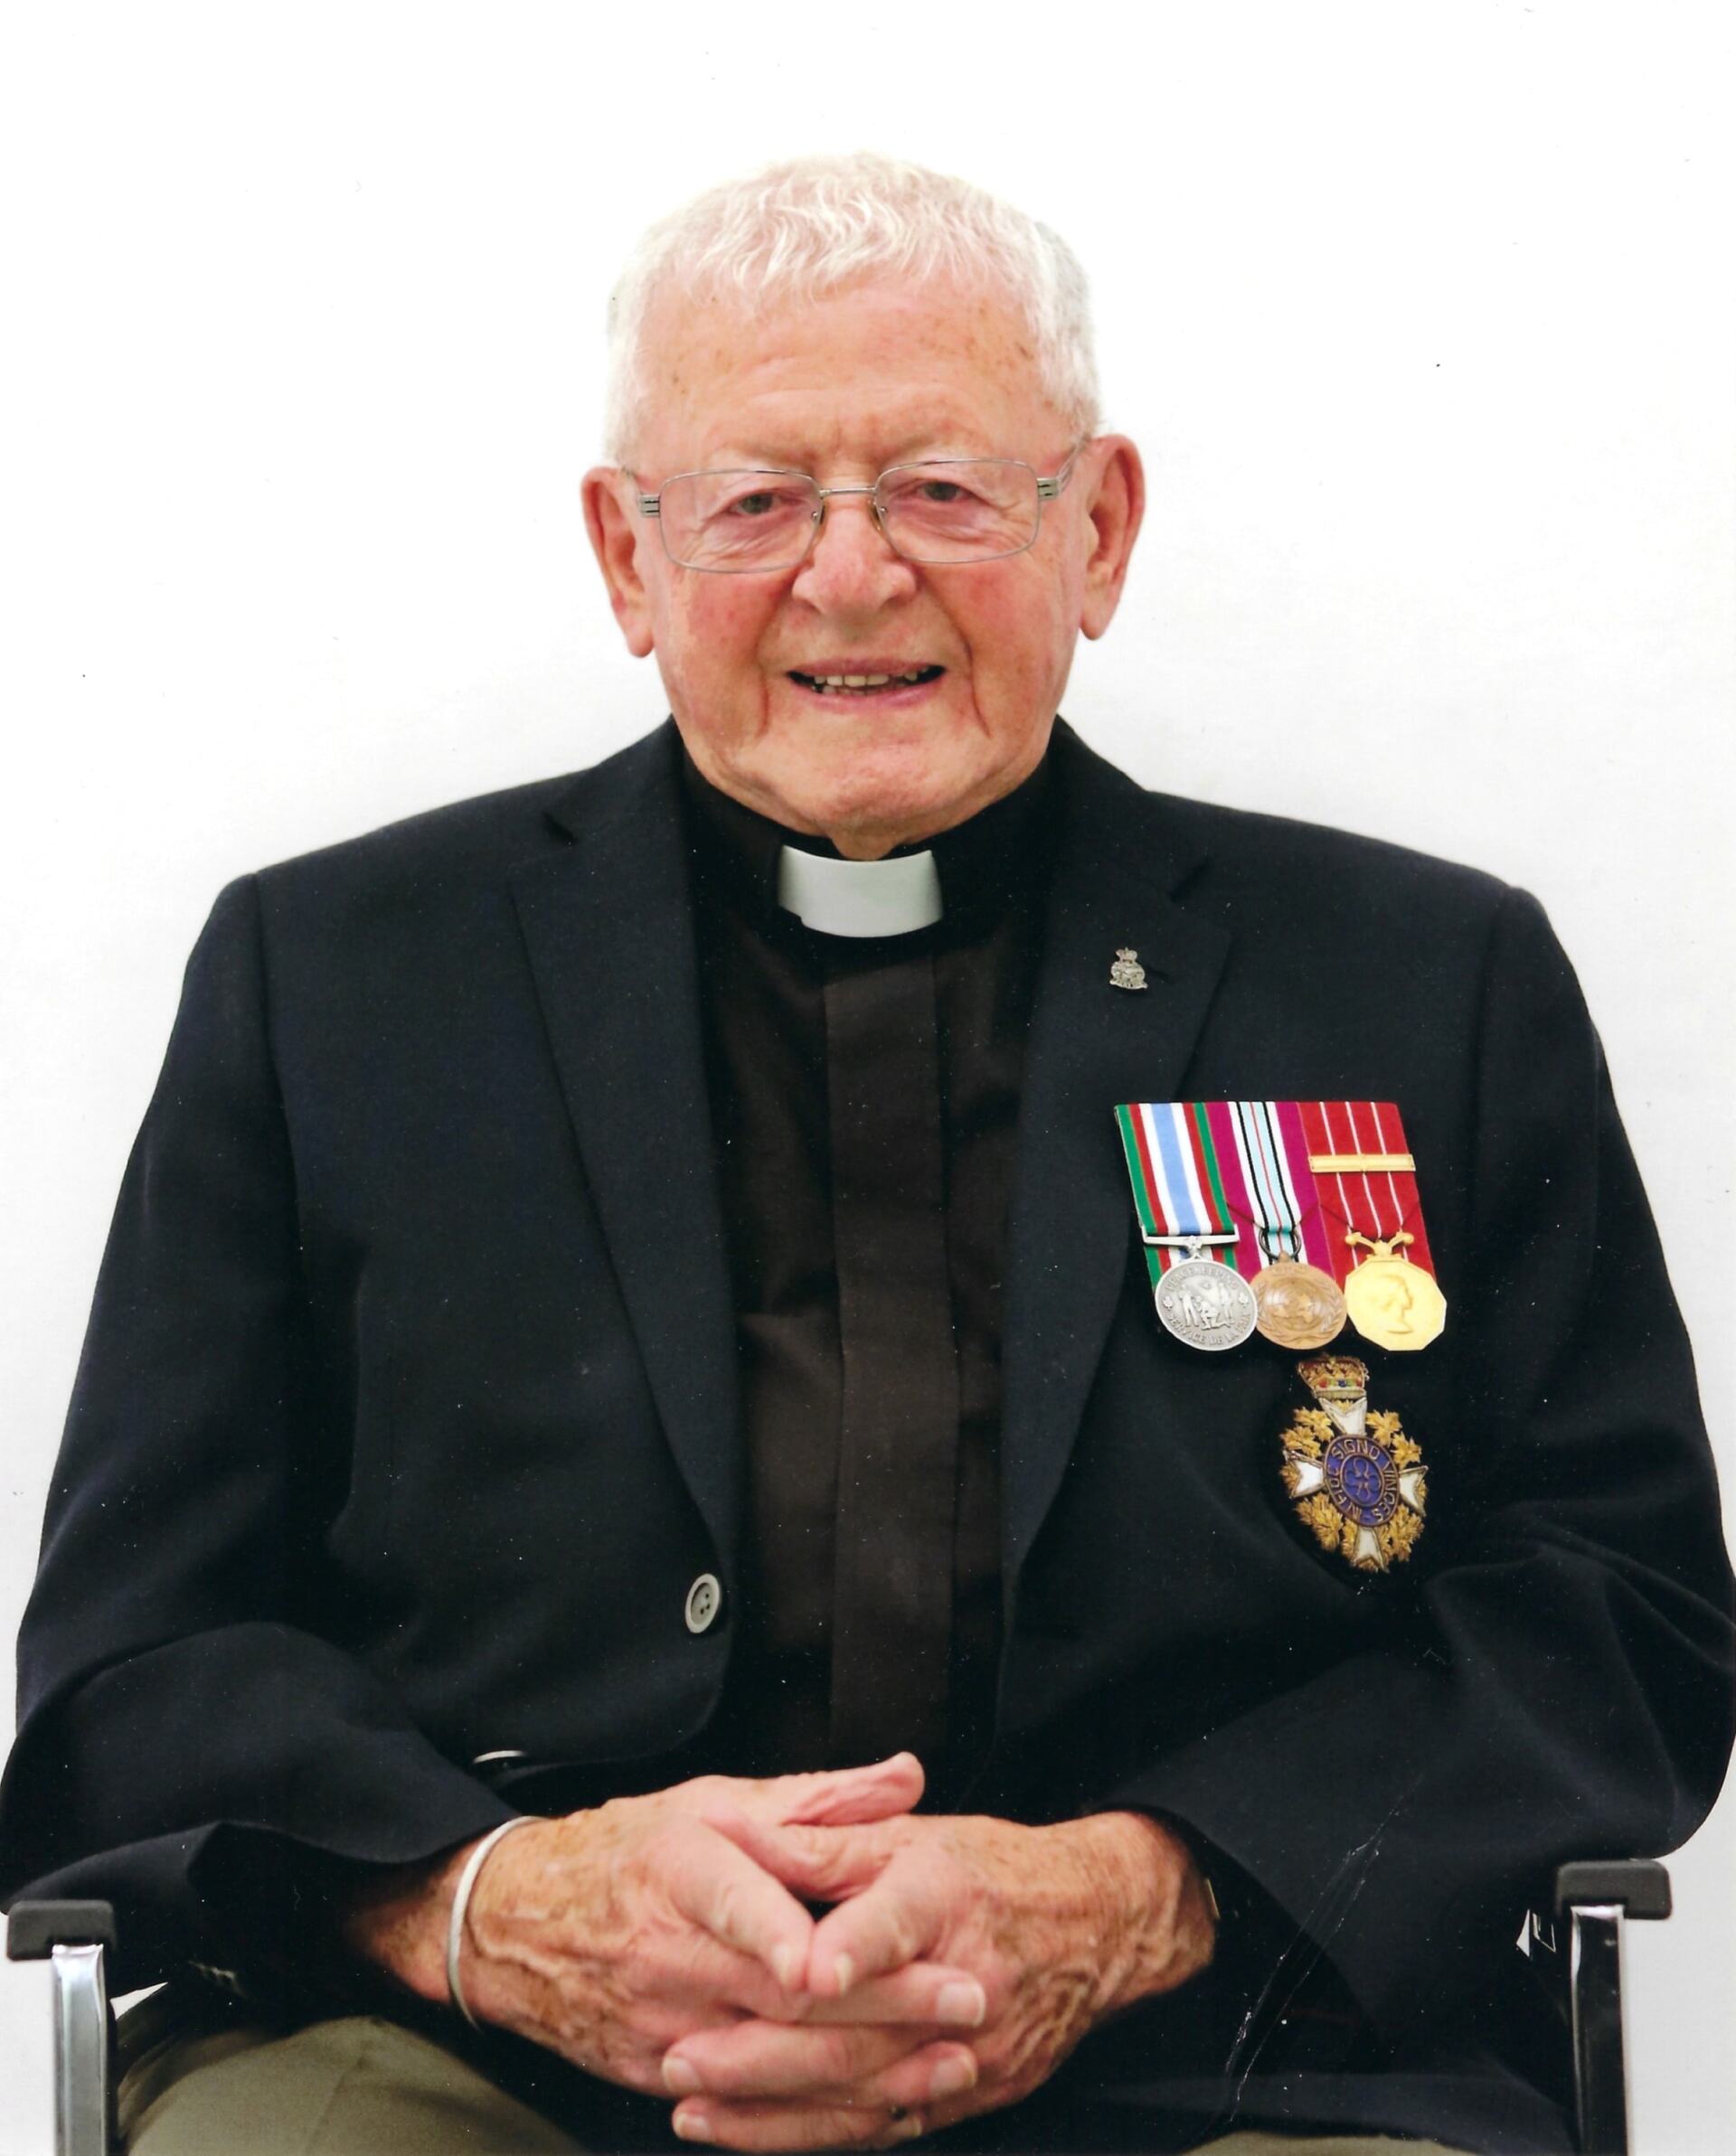 Portrait of Rev. Bob Jones, wearing a liturgical collar a black suit with three metals on his lapel.